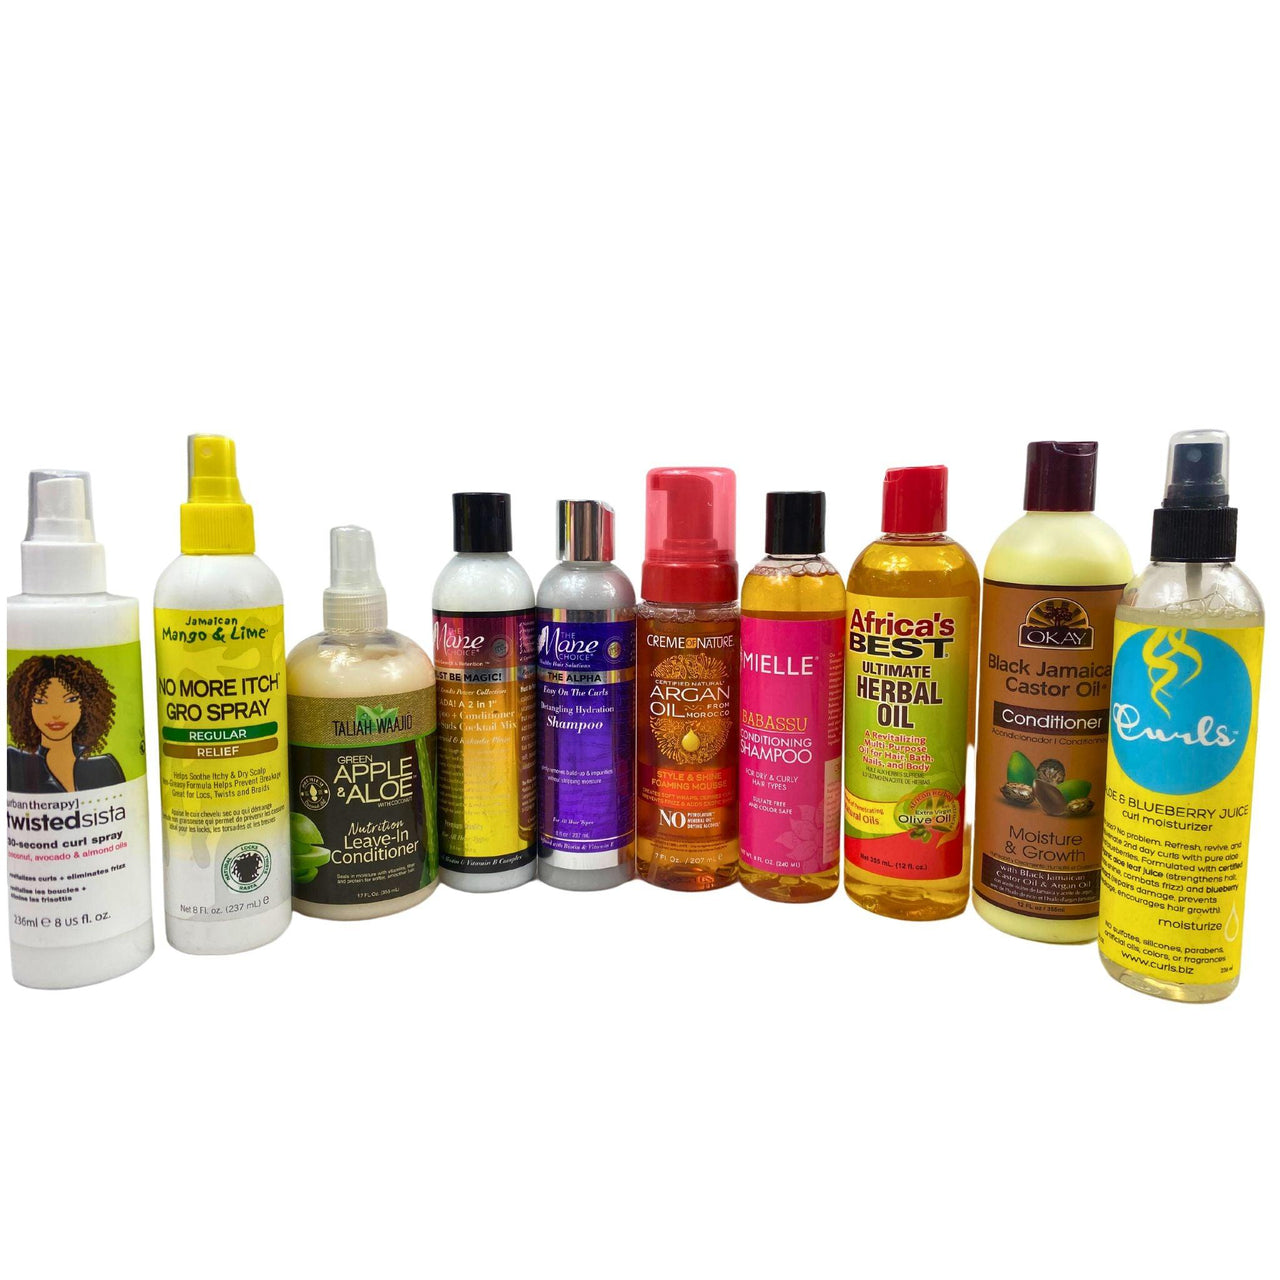 Hair Care Assorted Mix Includes Brands like Mielle,The Mane,Africa's Best,Curls - shampoo,spray,conditioner,oil (60 Pcs lot) - Discount Wholesalers Inc